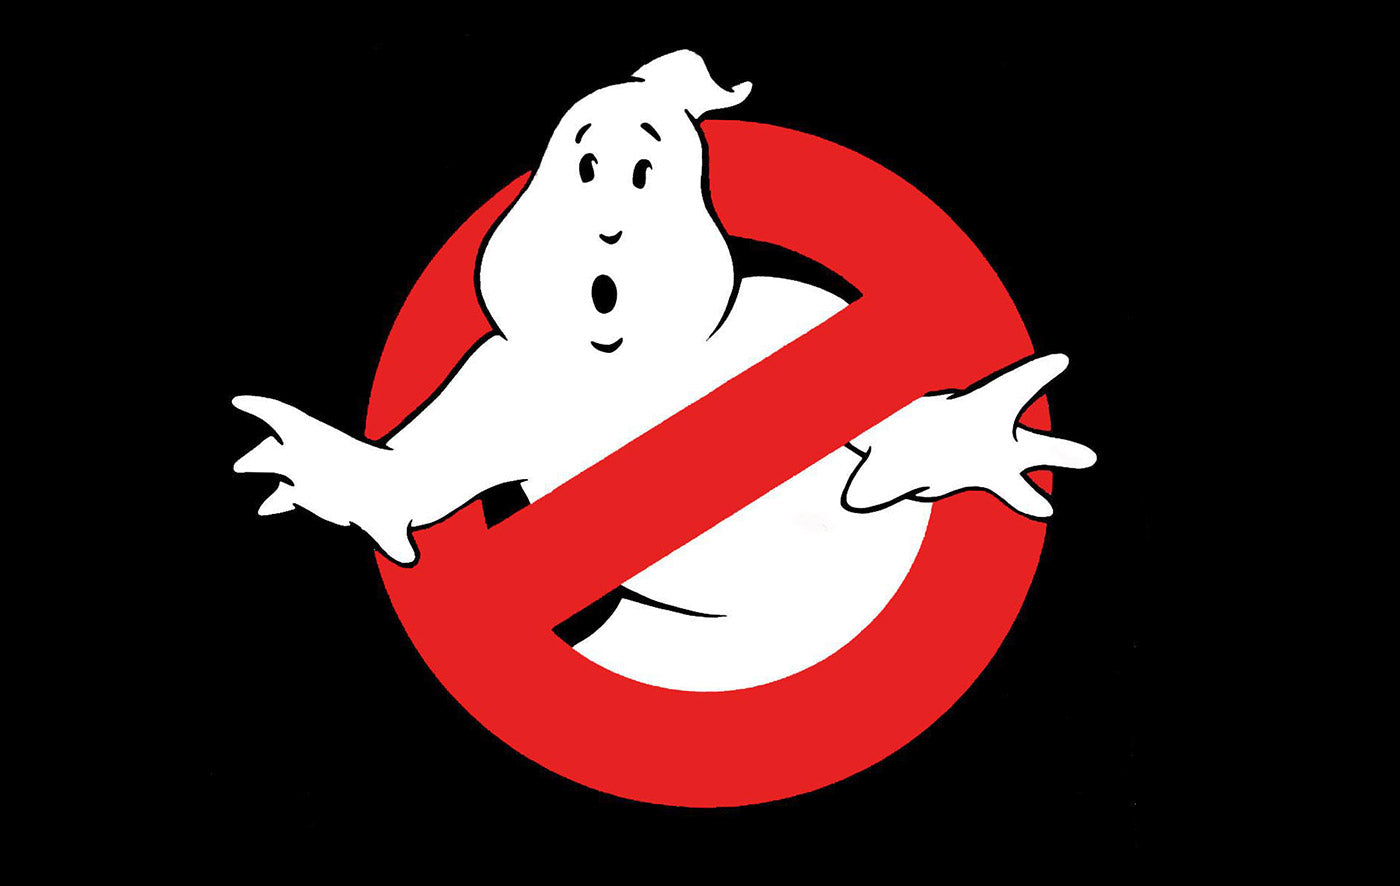 Who you gonna call? Been Ghosted! How to mourn the ghost of a friendship past.